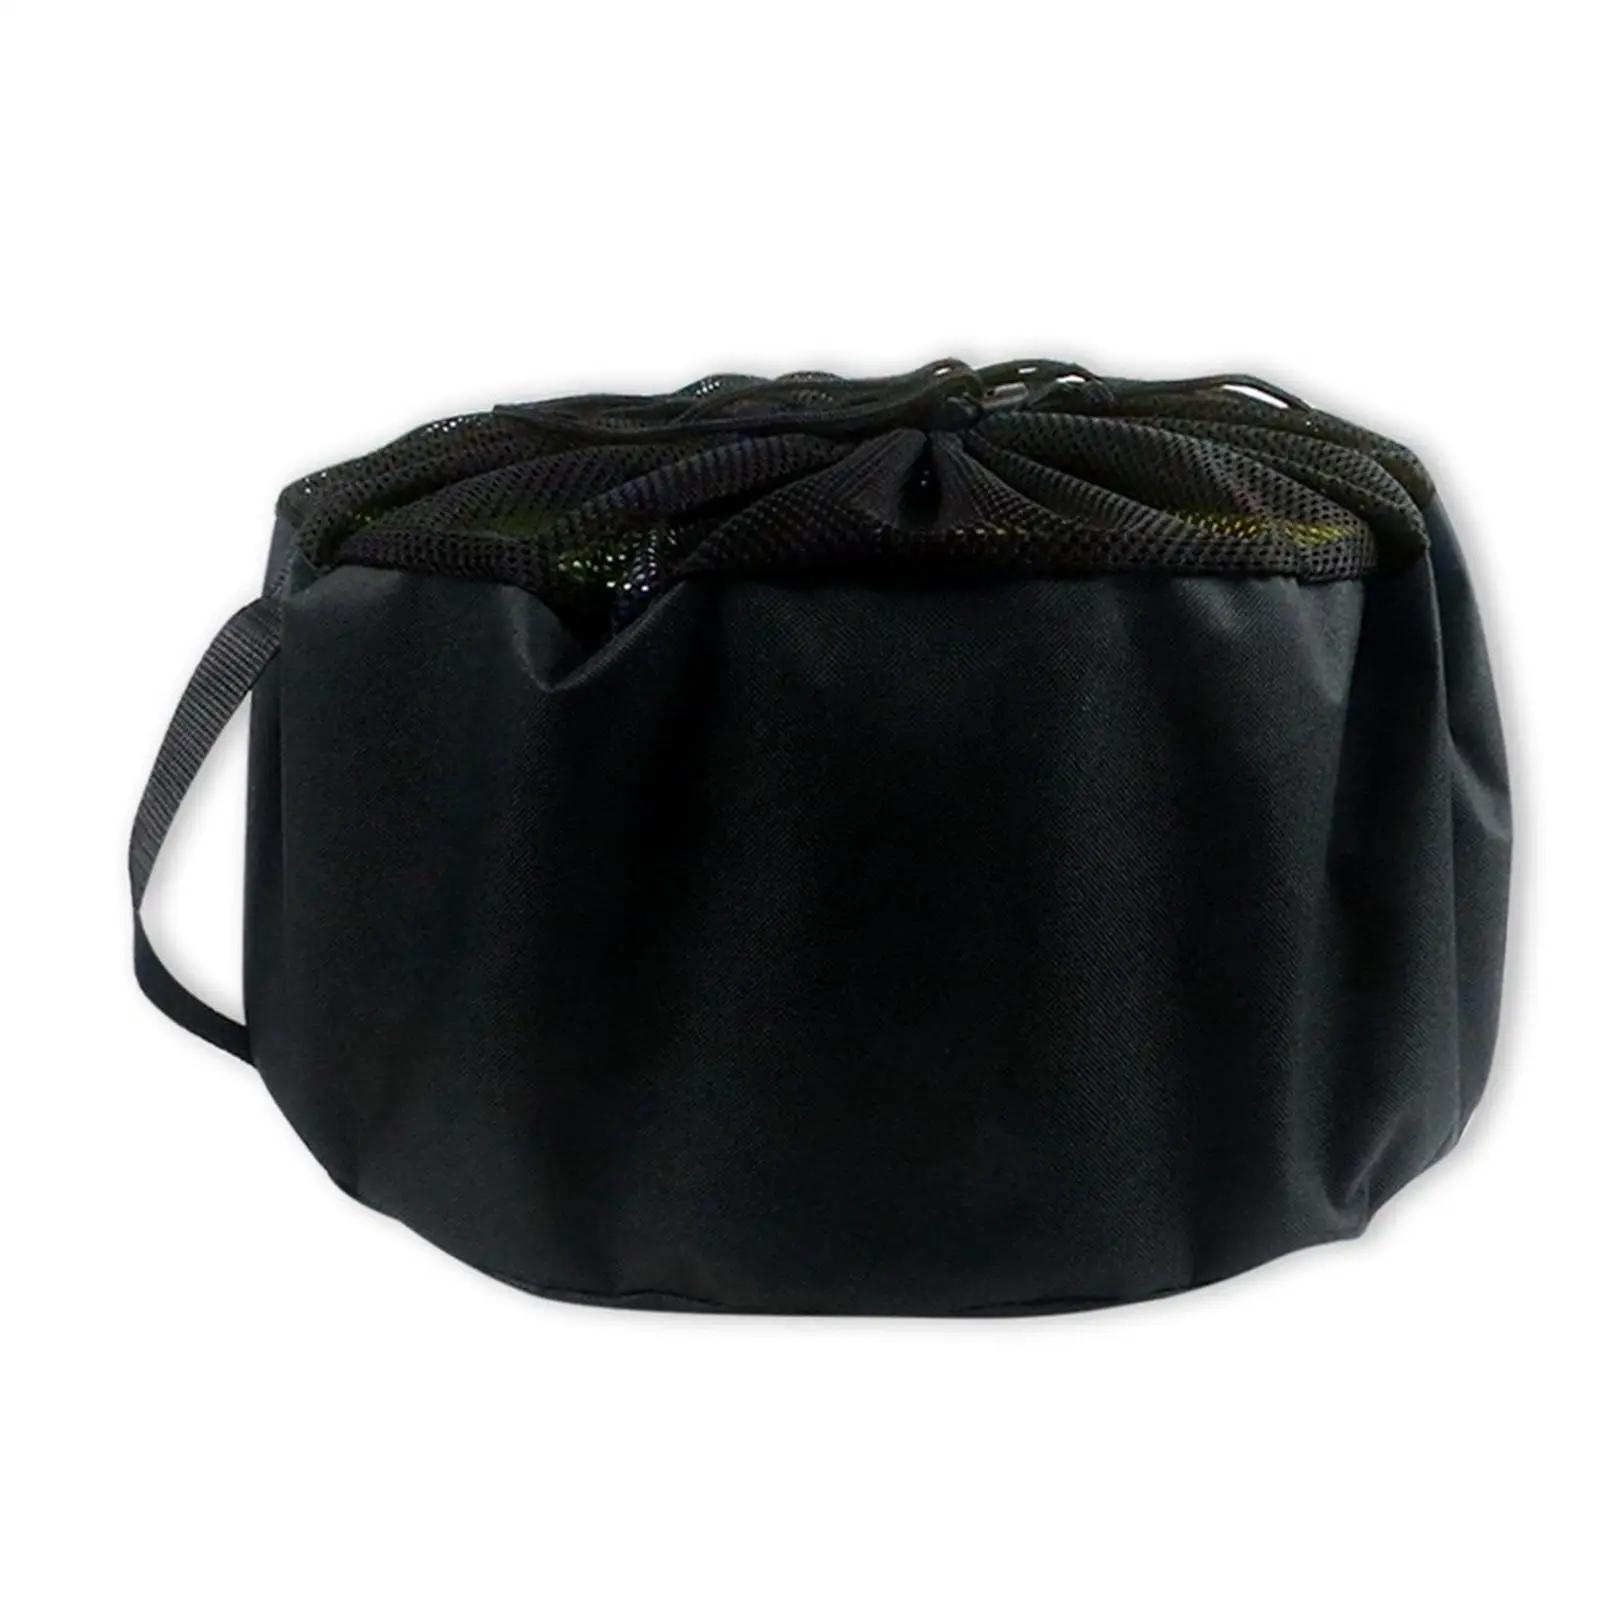 Water Hose Bag, with Carry Handle Large Capacity for Water Hoses Gardening Equipment